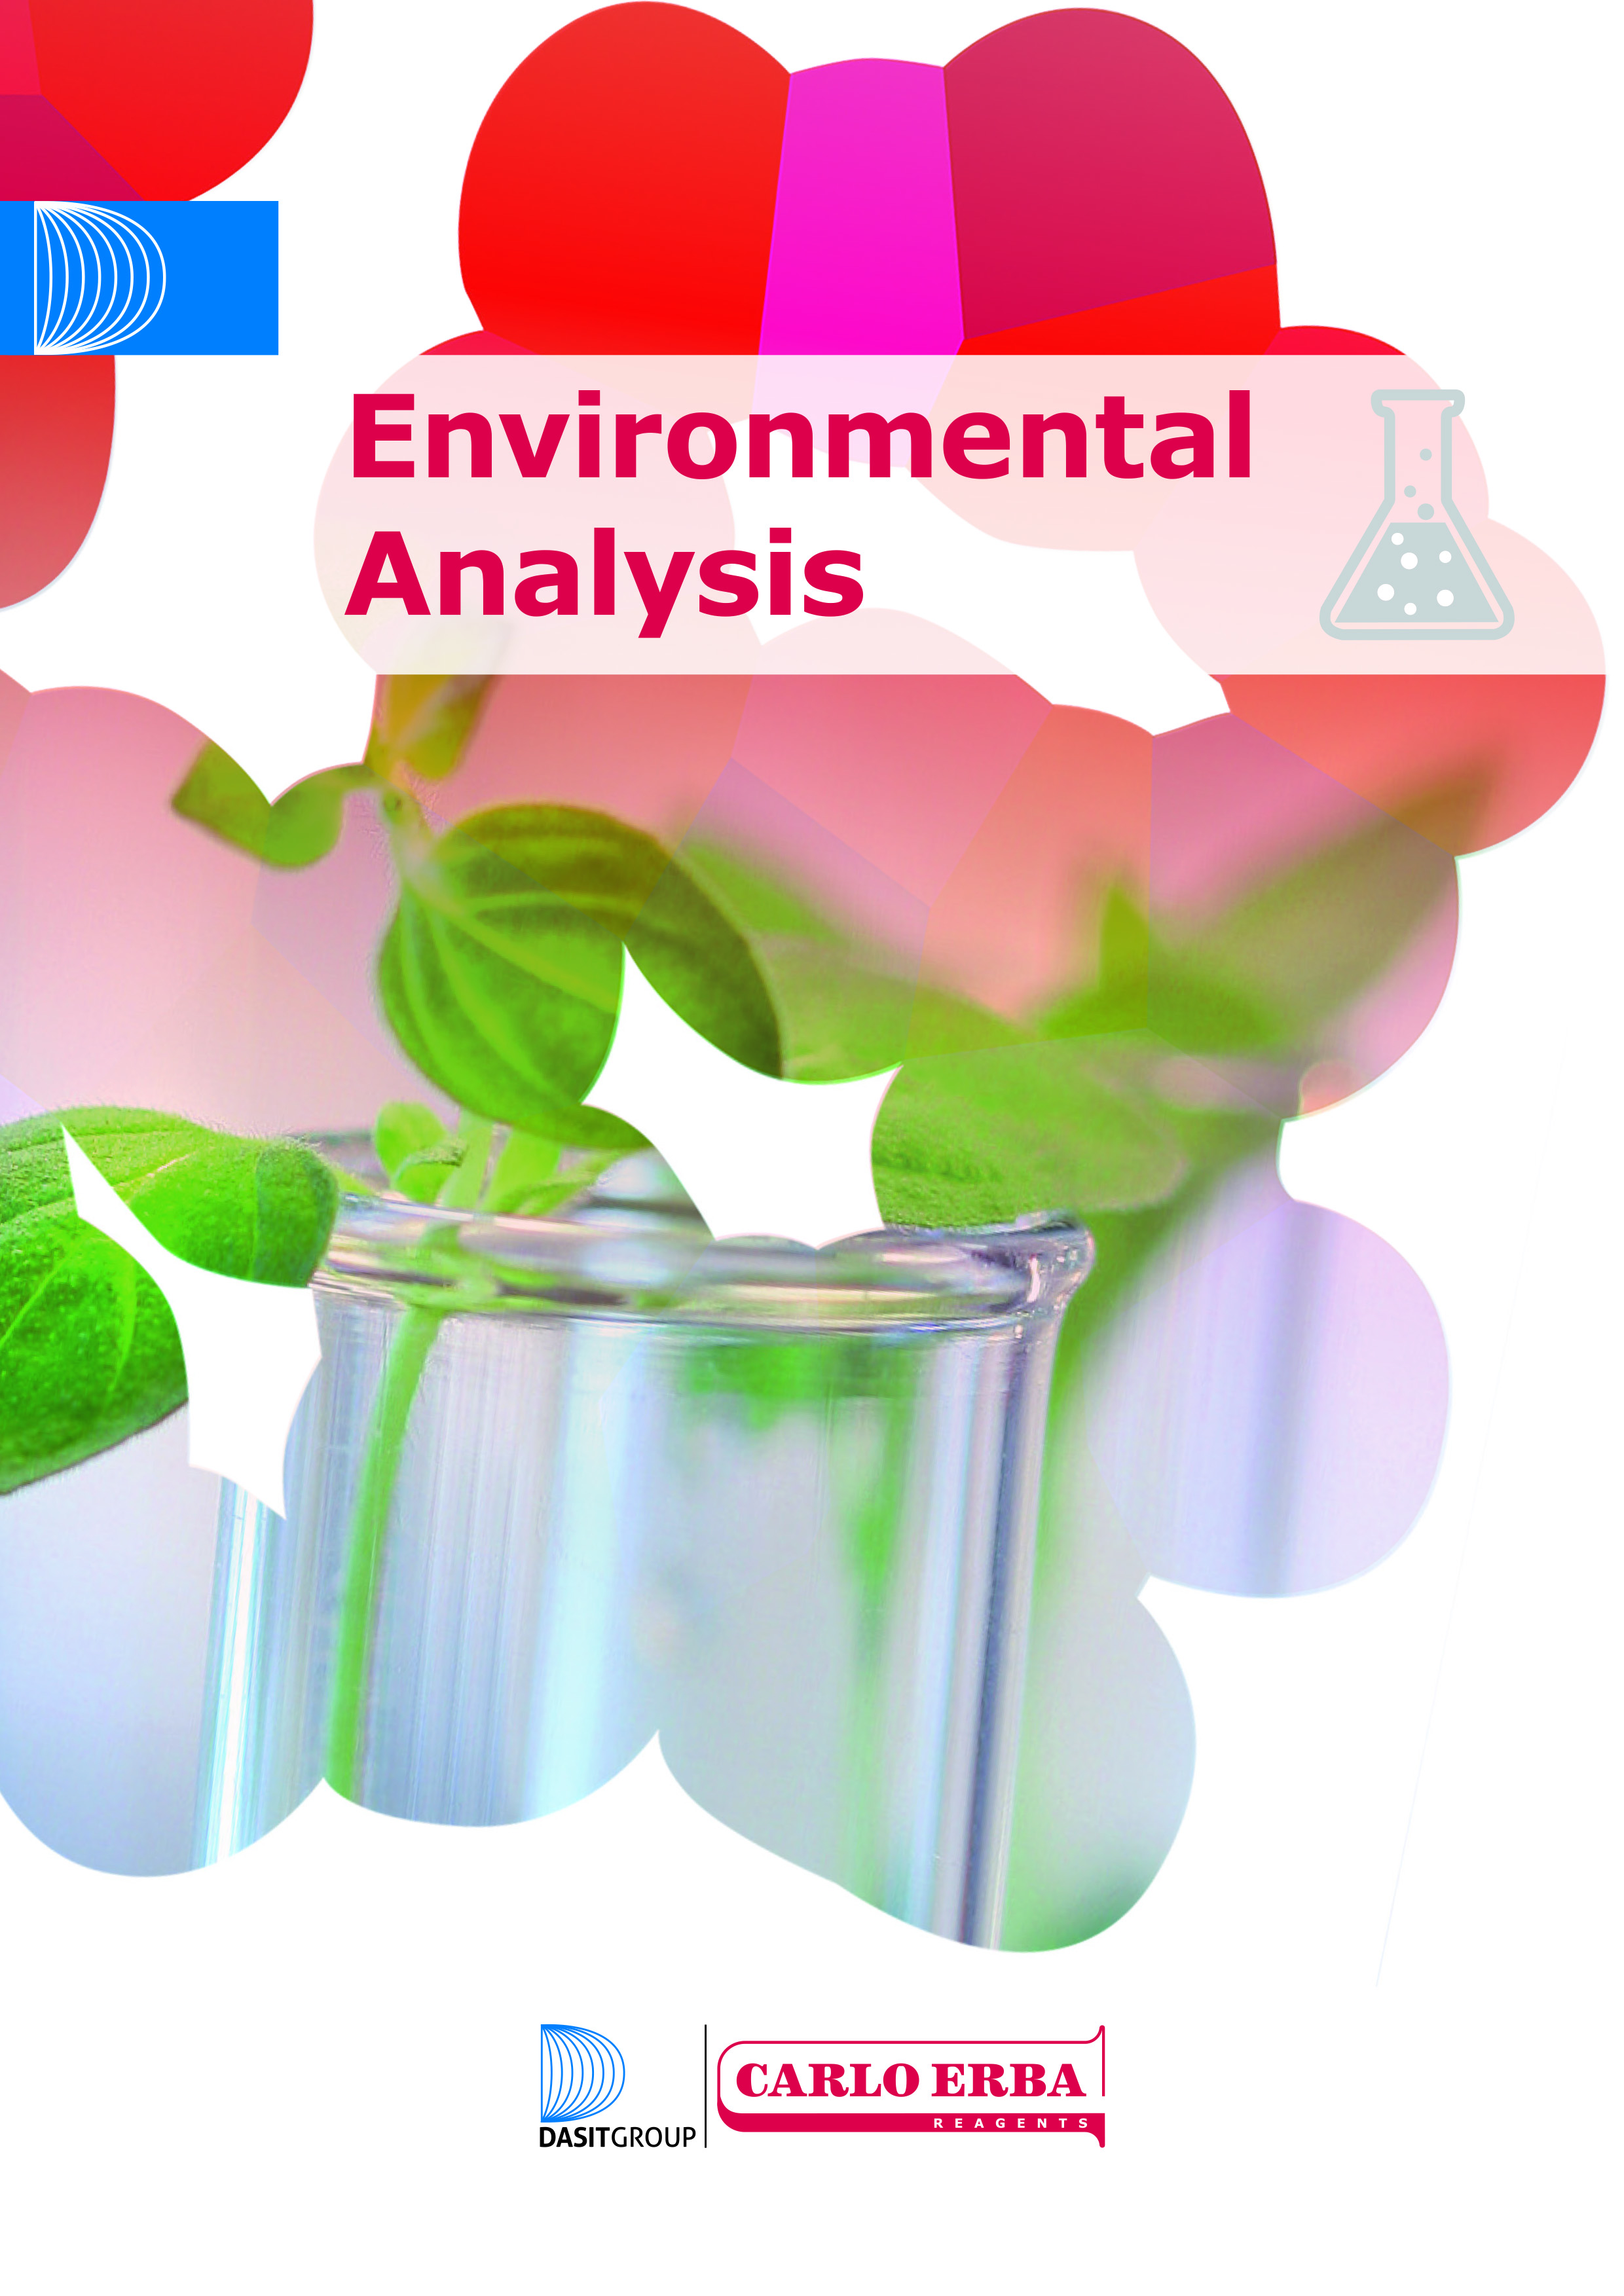 Specific & essential chemicals for environmental analysis